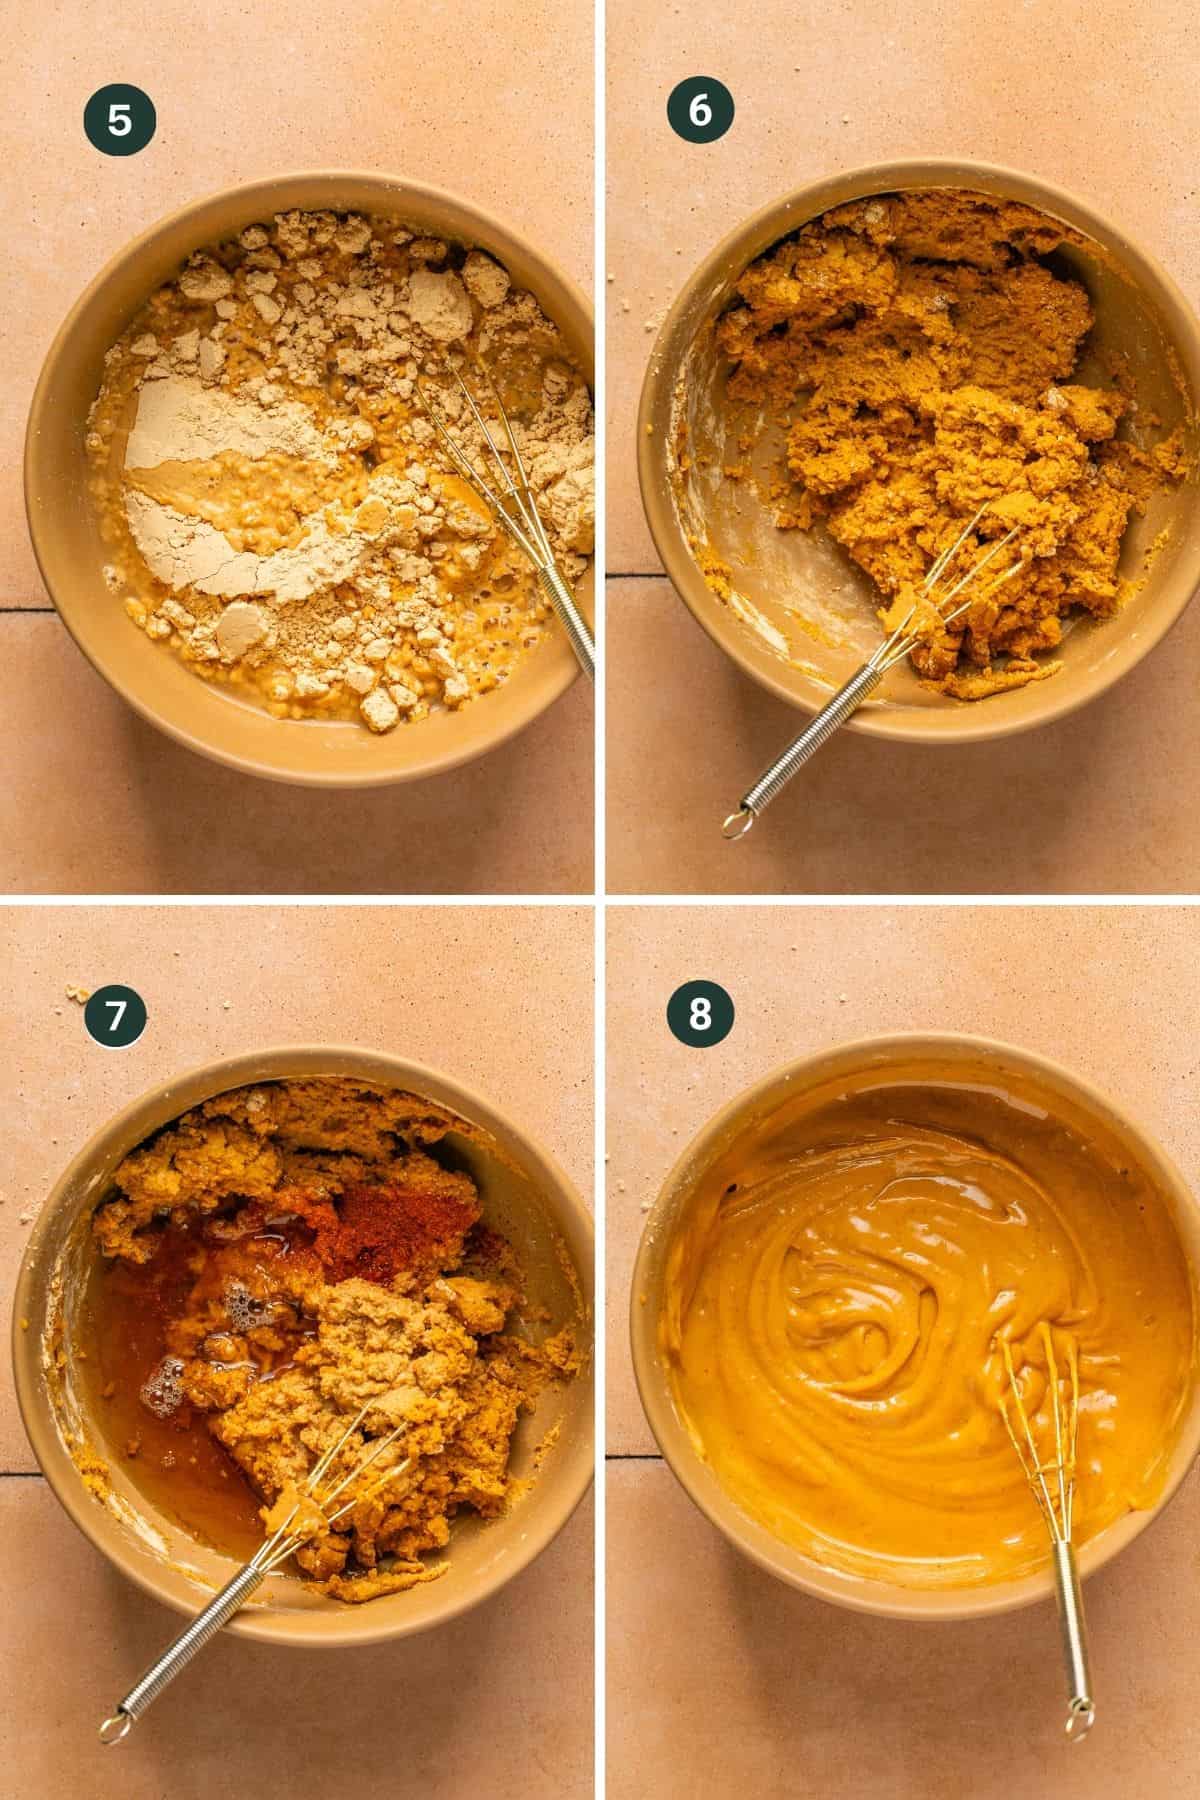 Four images showing how to mix PB2 powdered peanut butter, water, syrup, lemon juice and cayenne for peanut sauce. 